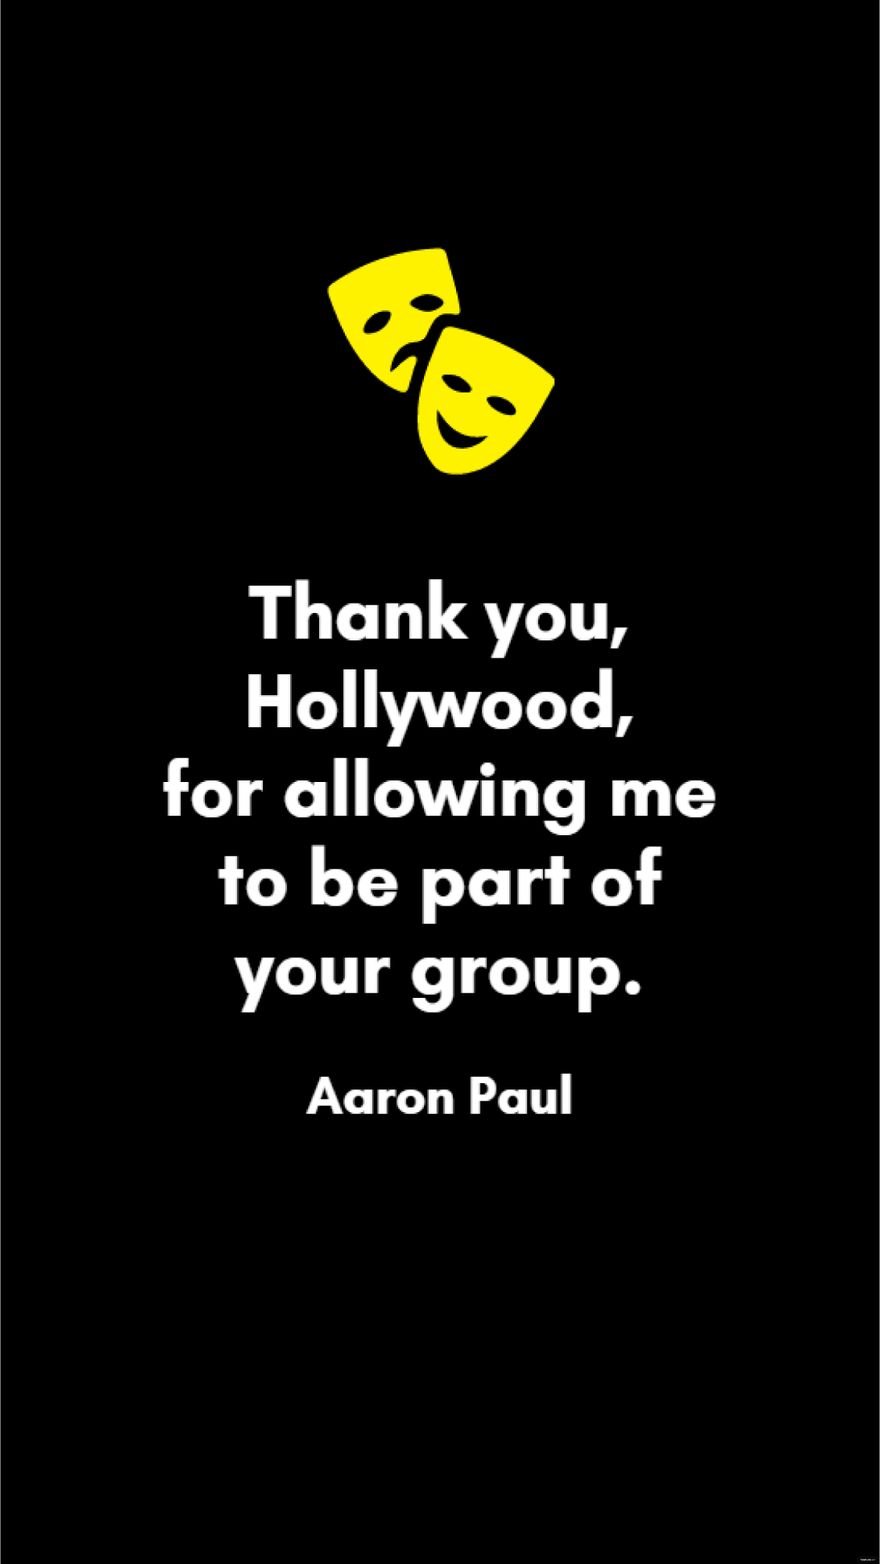 Aaron Paul - Thank you, Hollywood, for allowing me to be part of your group.